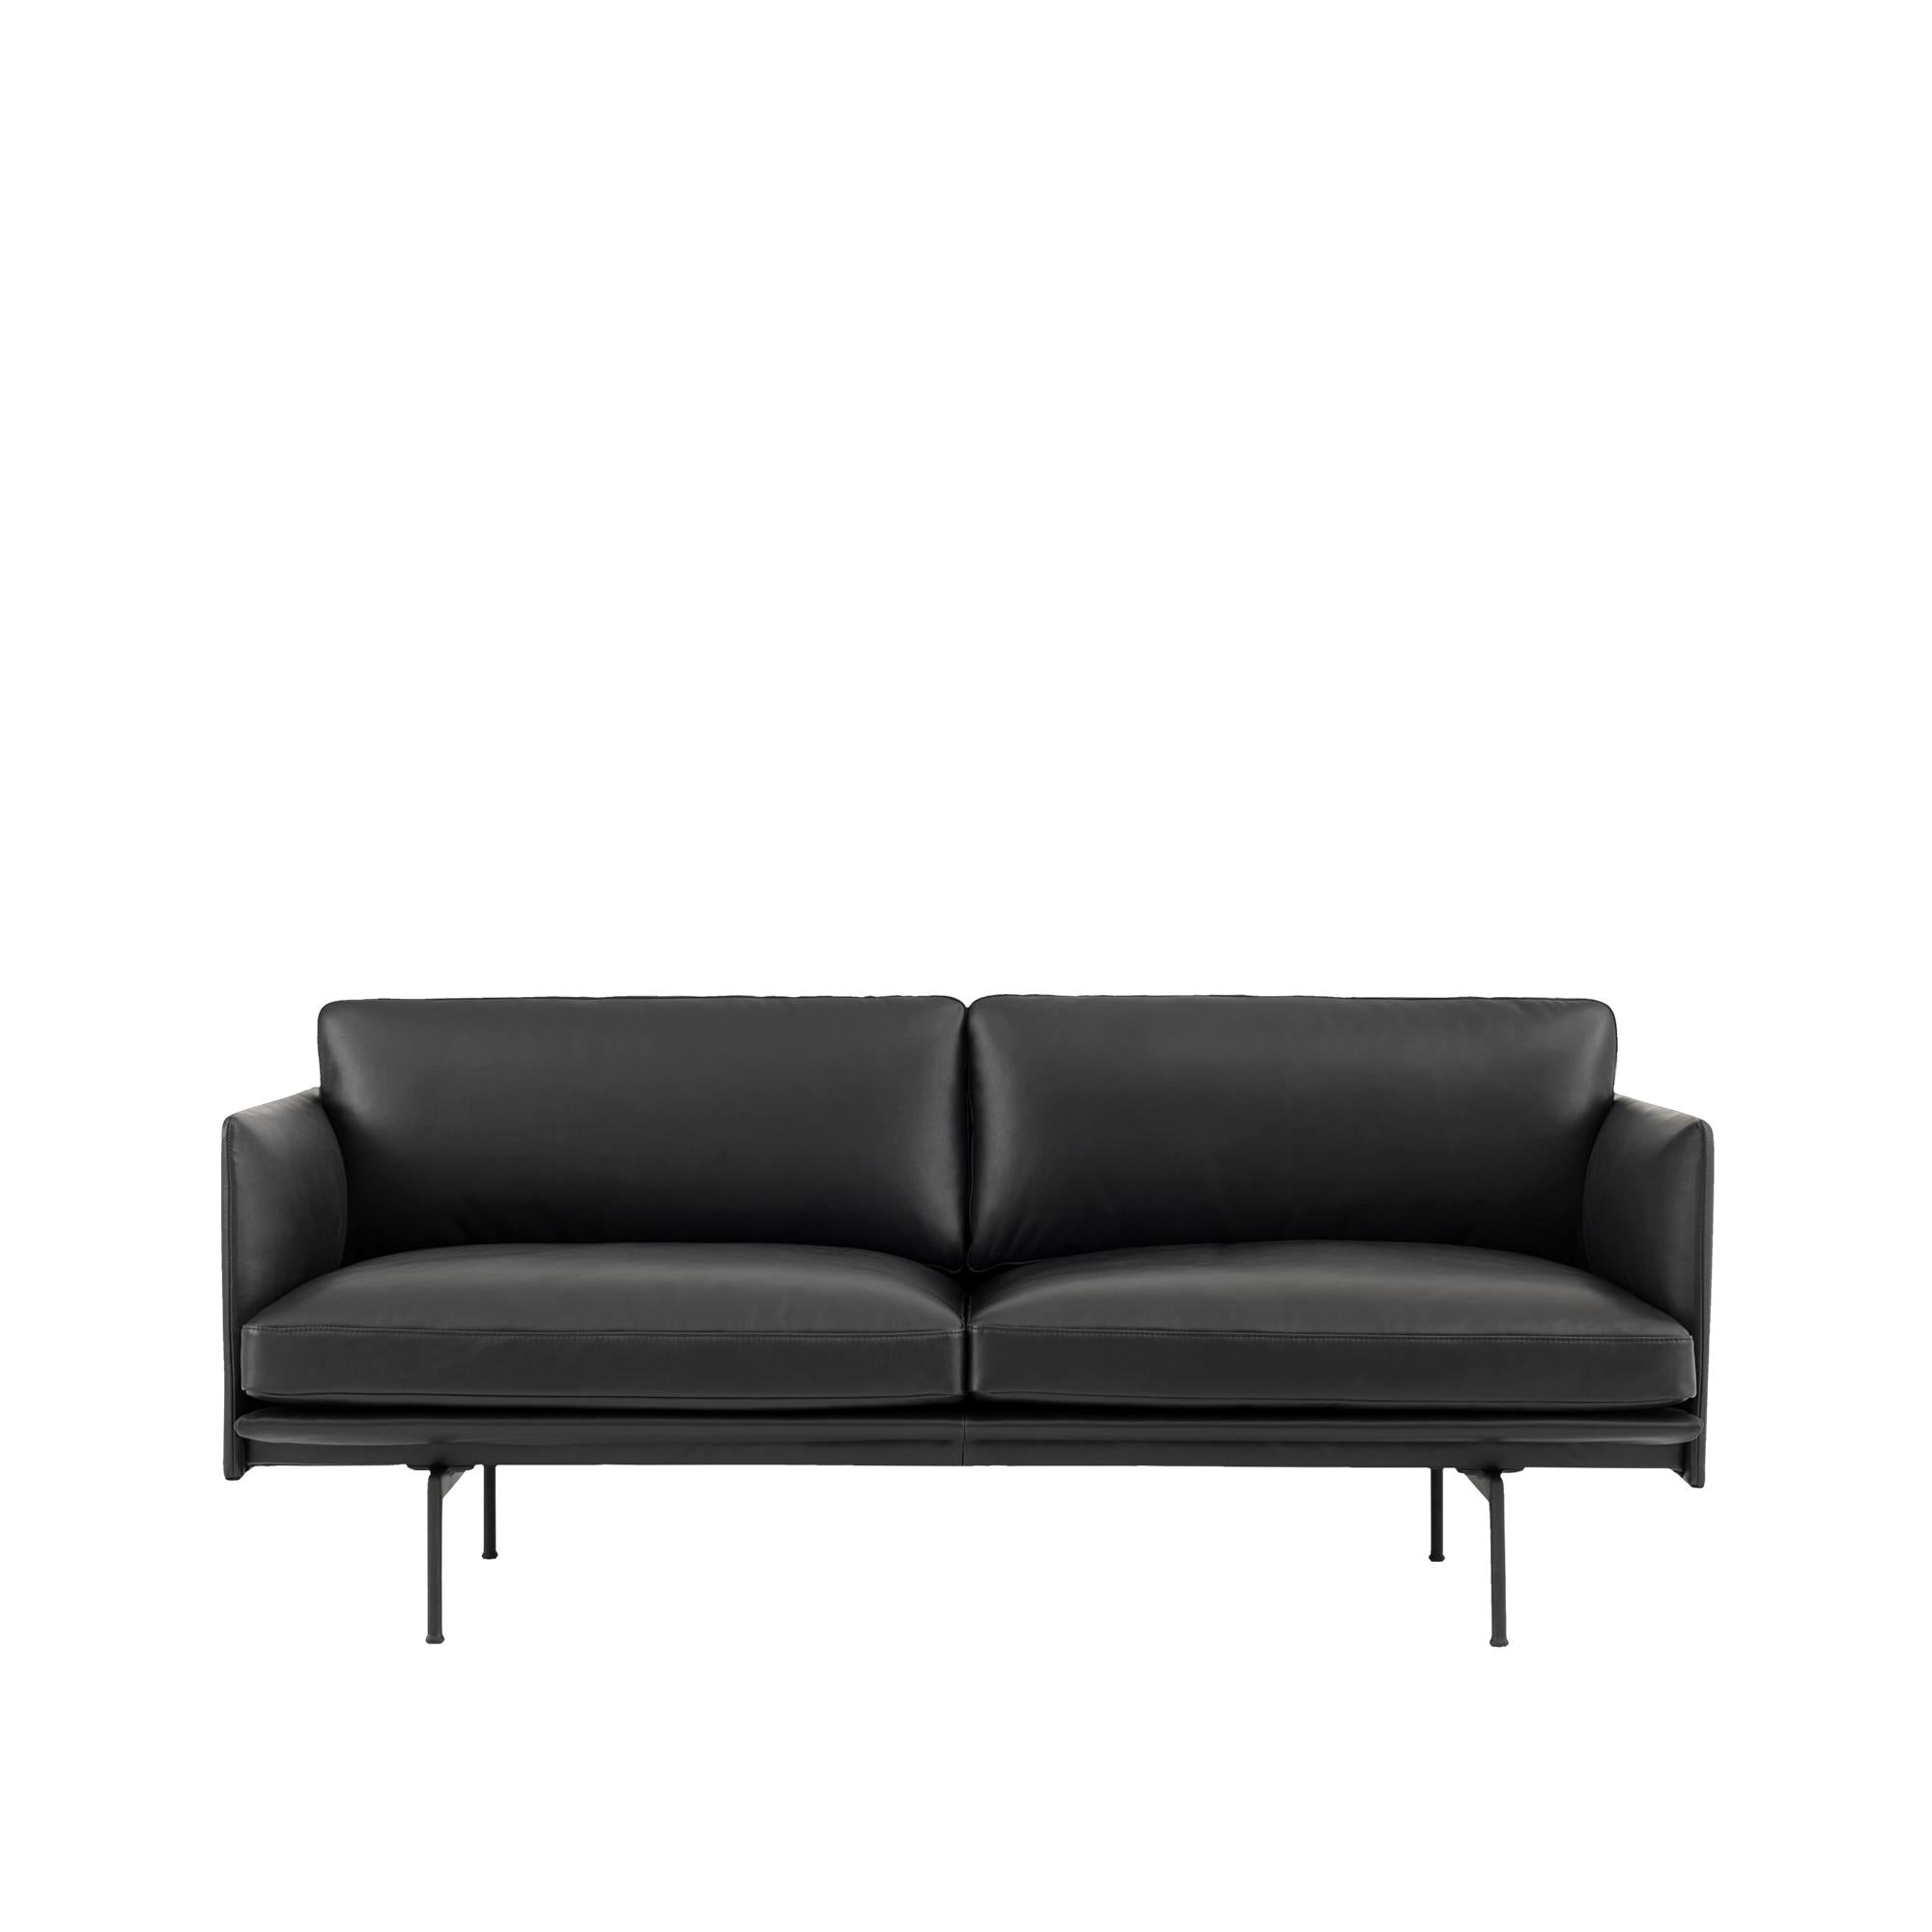 Muuto Outline Sofa 2 Persons, Leather, Black Refine Leather